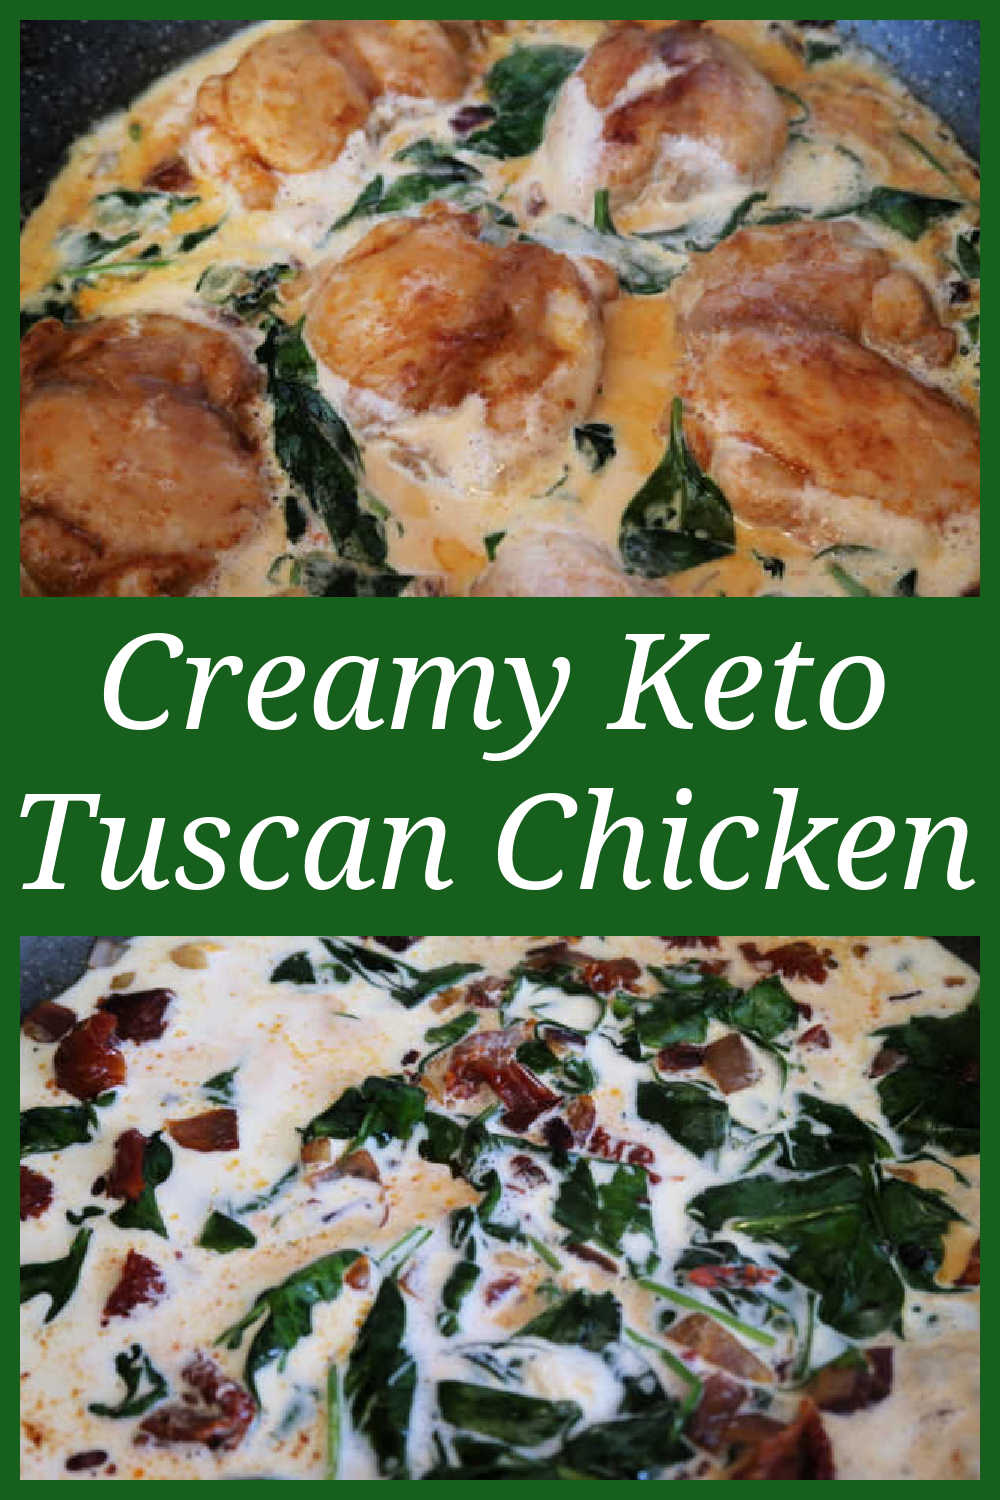 Keto Tuscan Chicken Recipe - How to make the best easy, creamy low carb friendly one pan chicken dinner in under 30 minutes - with the video tutorial.